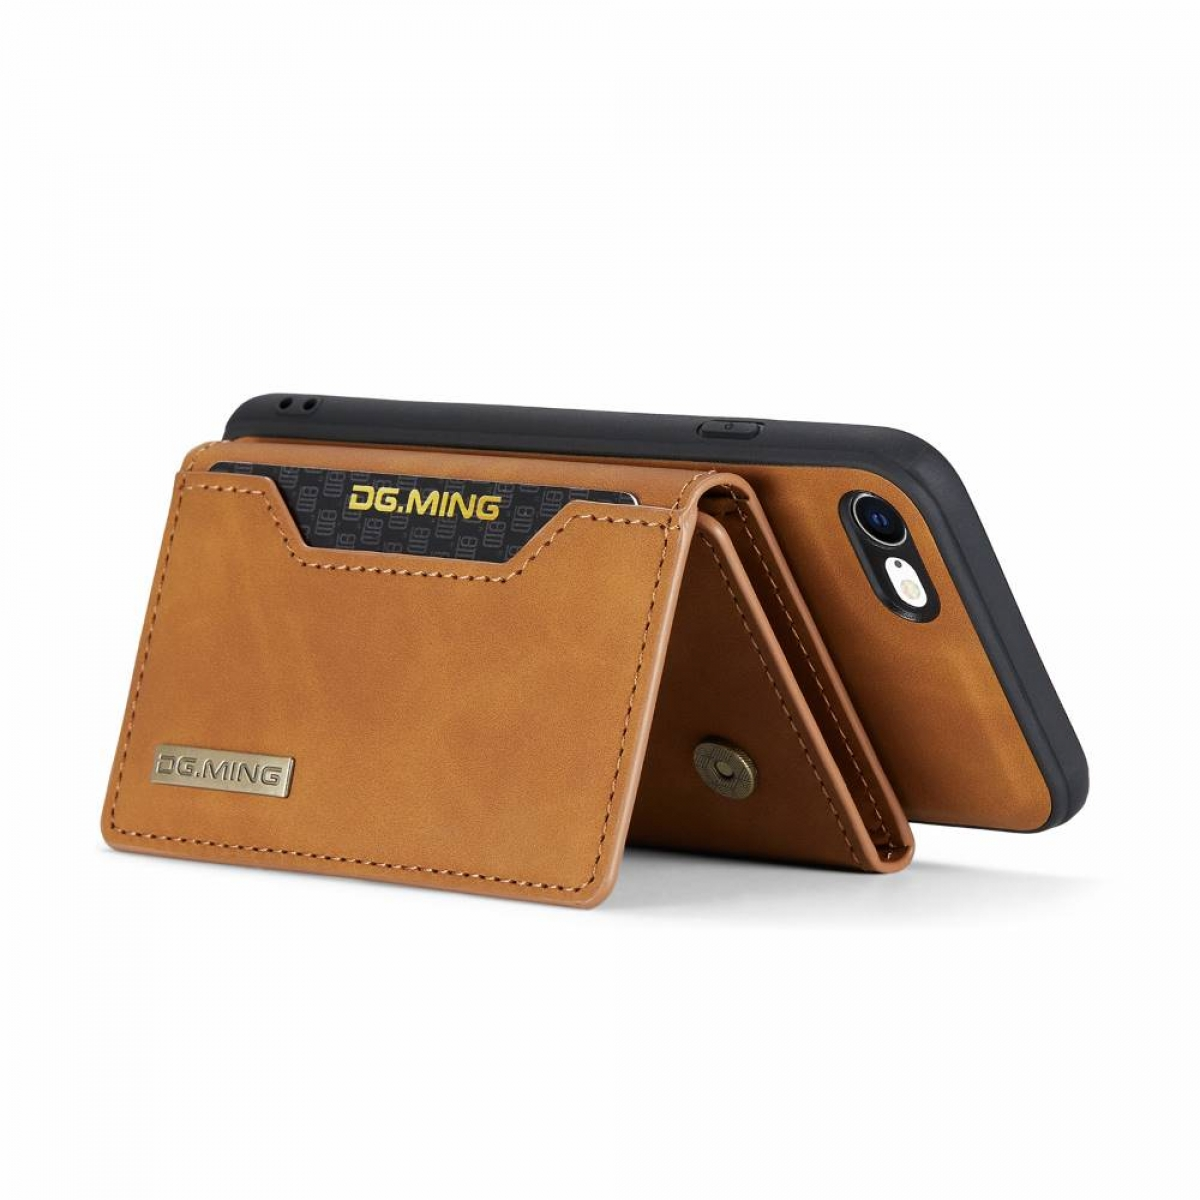 Braun Apple, DG 2in1, MING iPhone 7, Backcover, M2